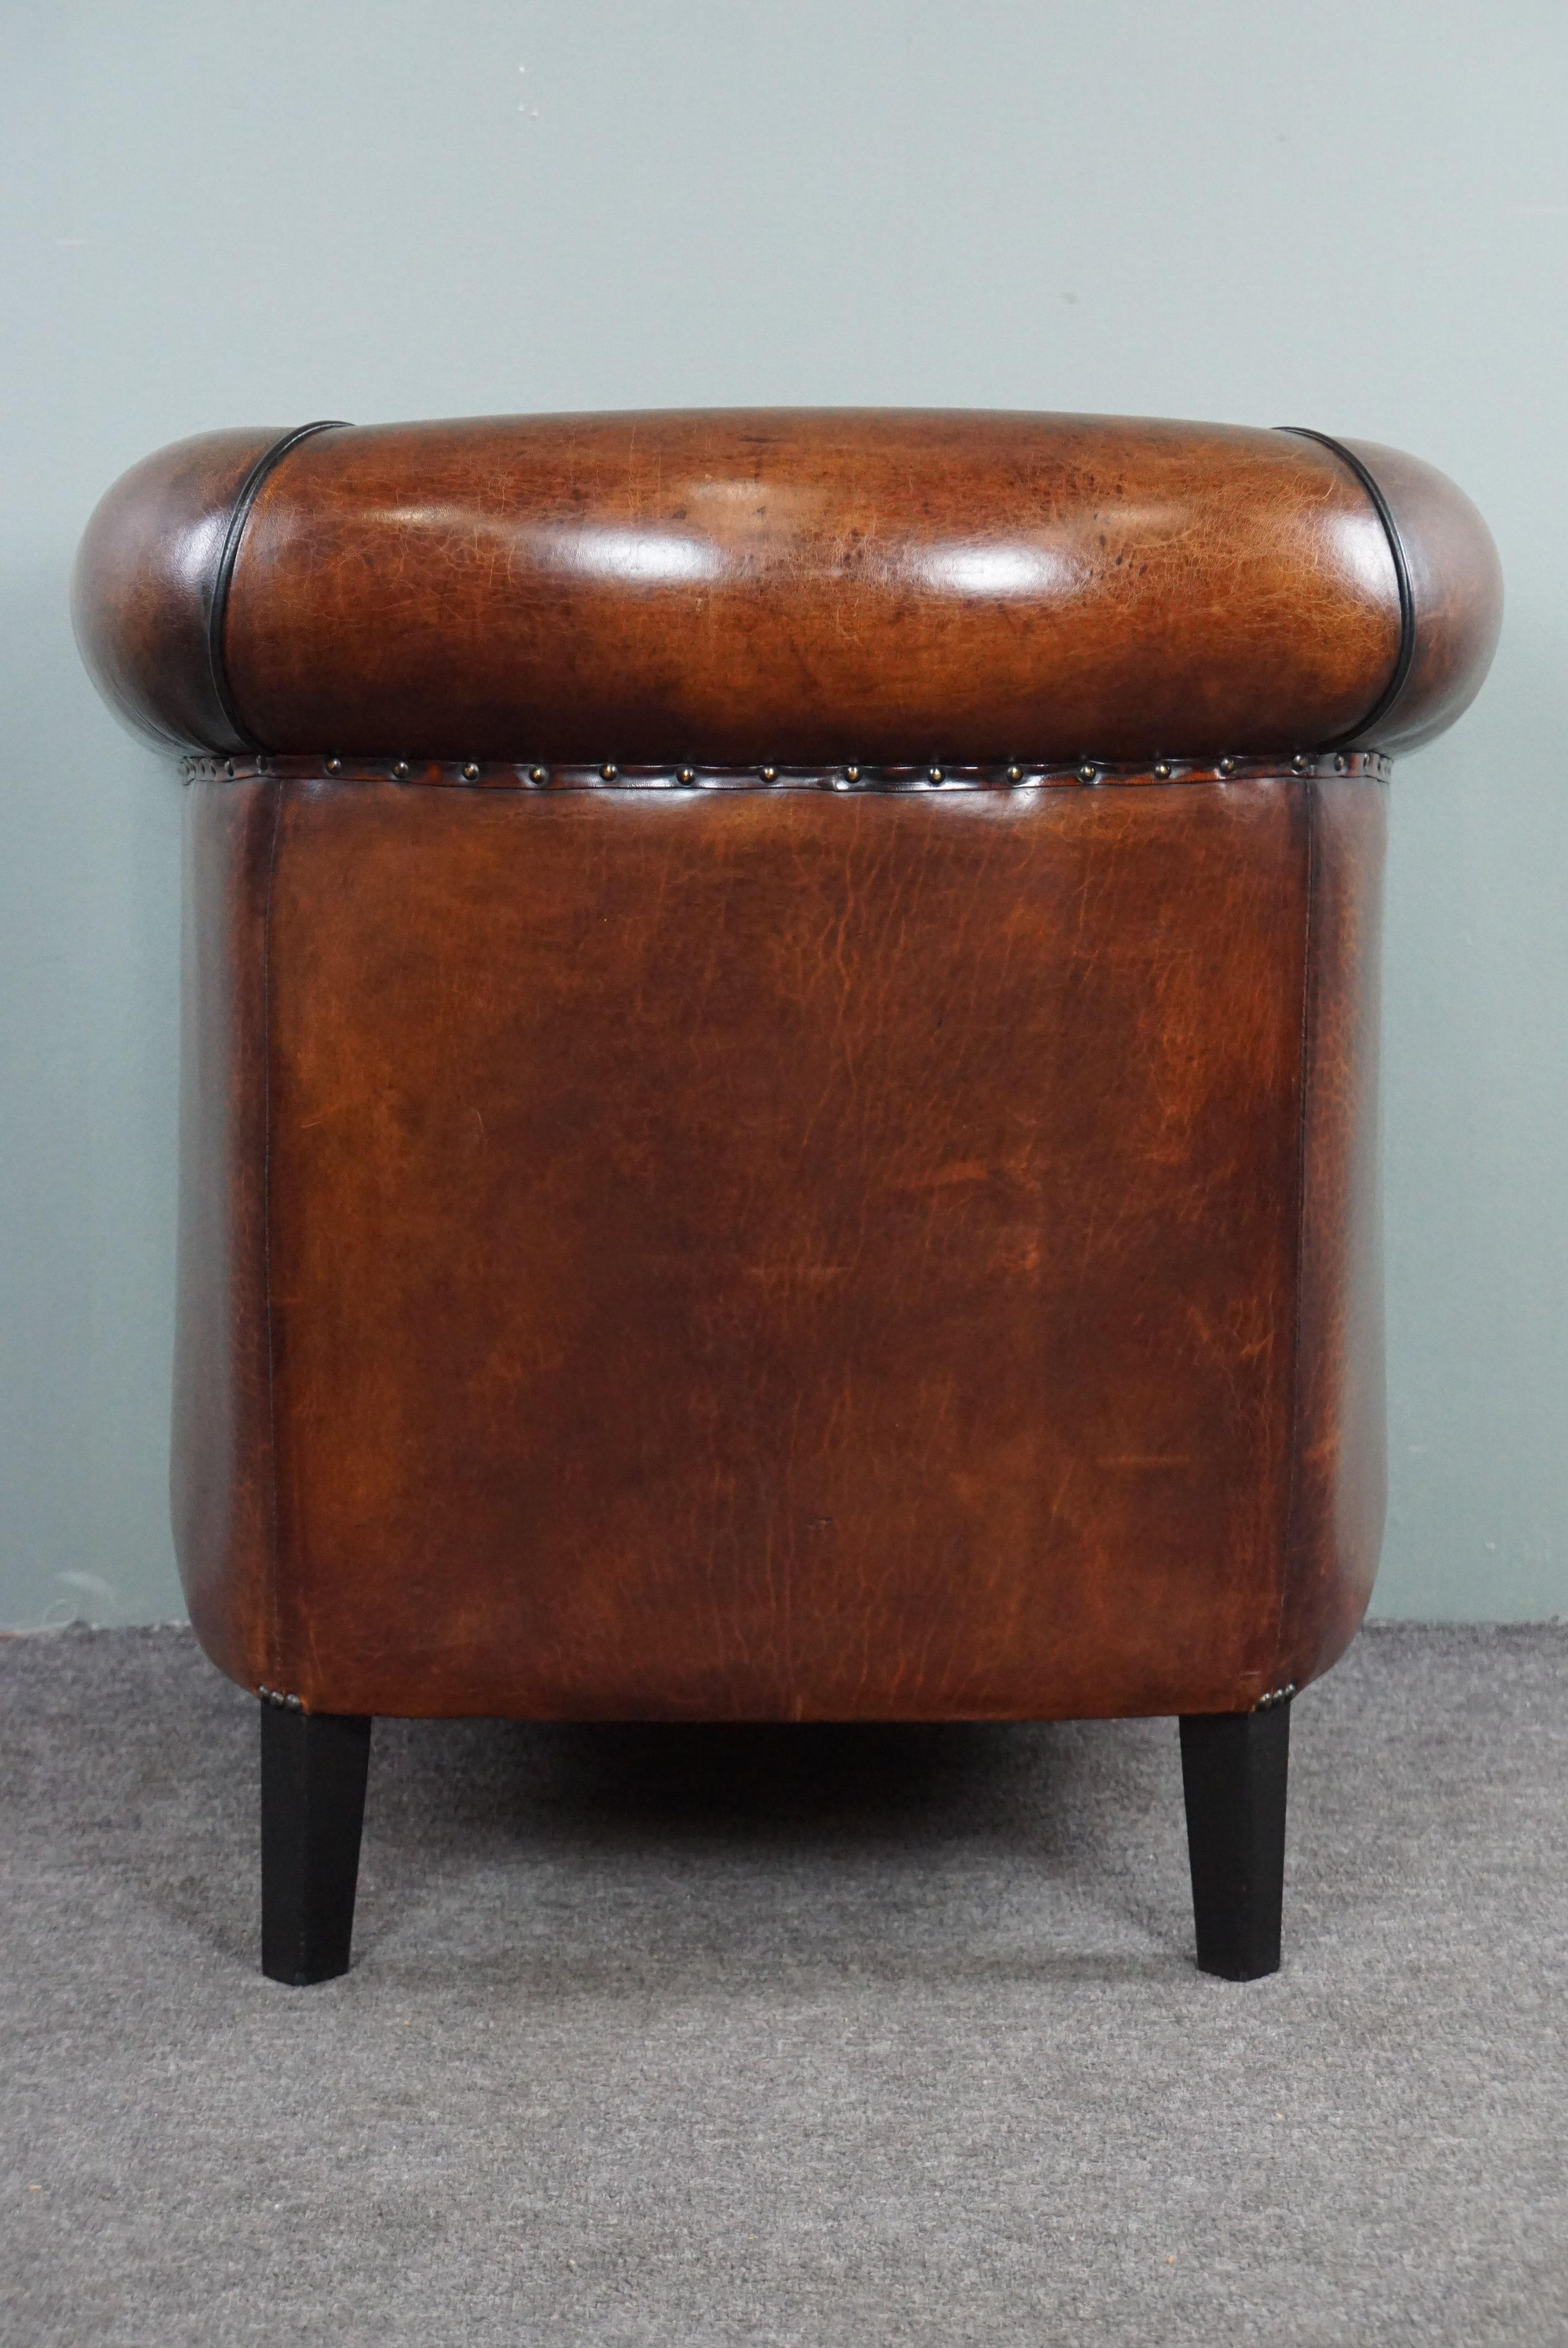 Hand-Crafted Sheep leather club chair with black piping and decorative nails